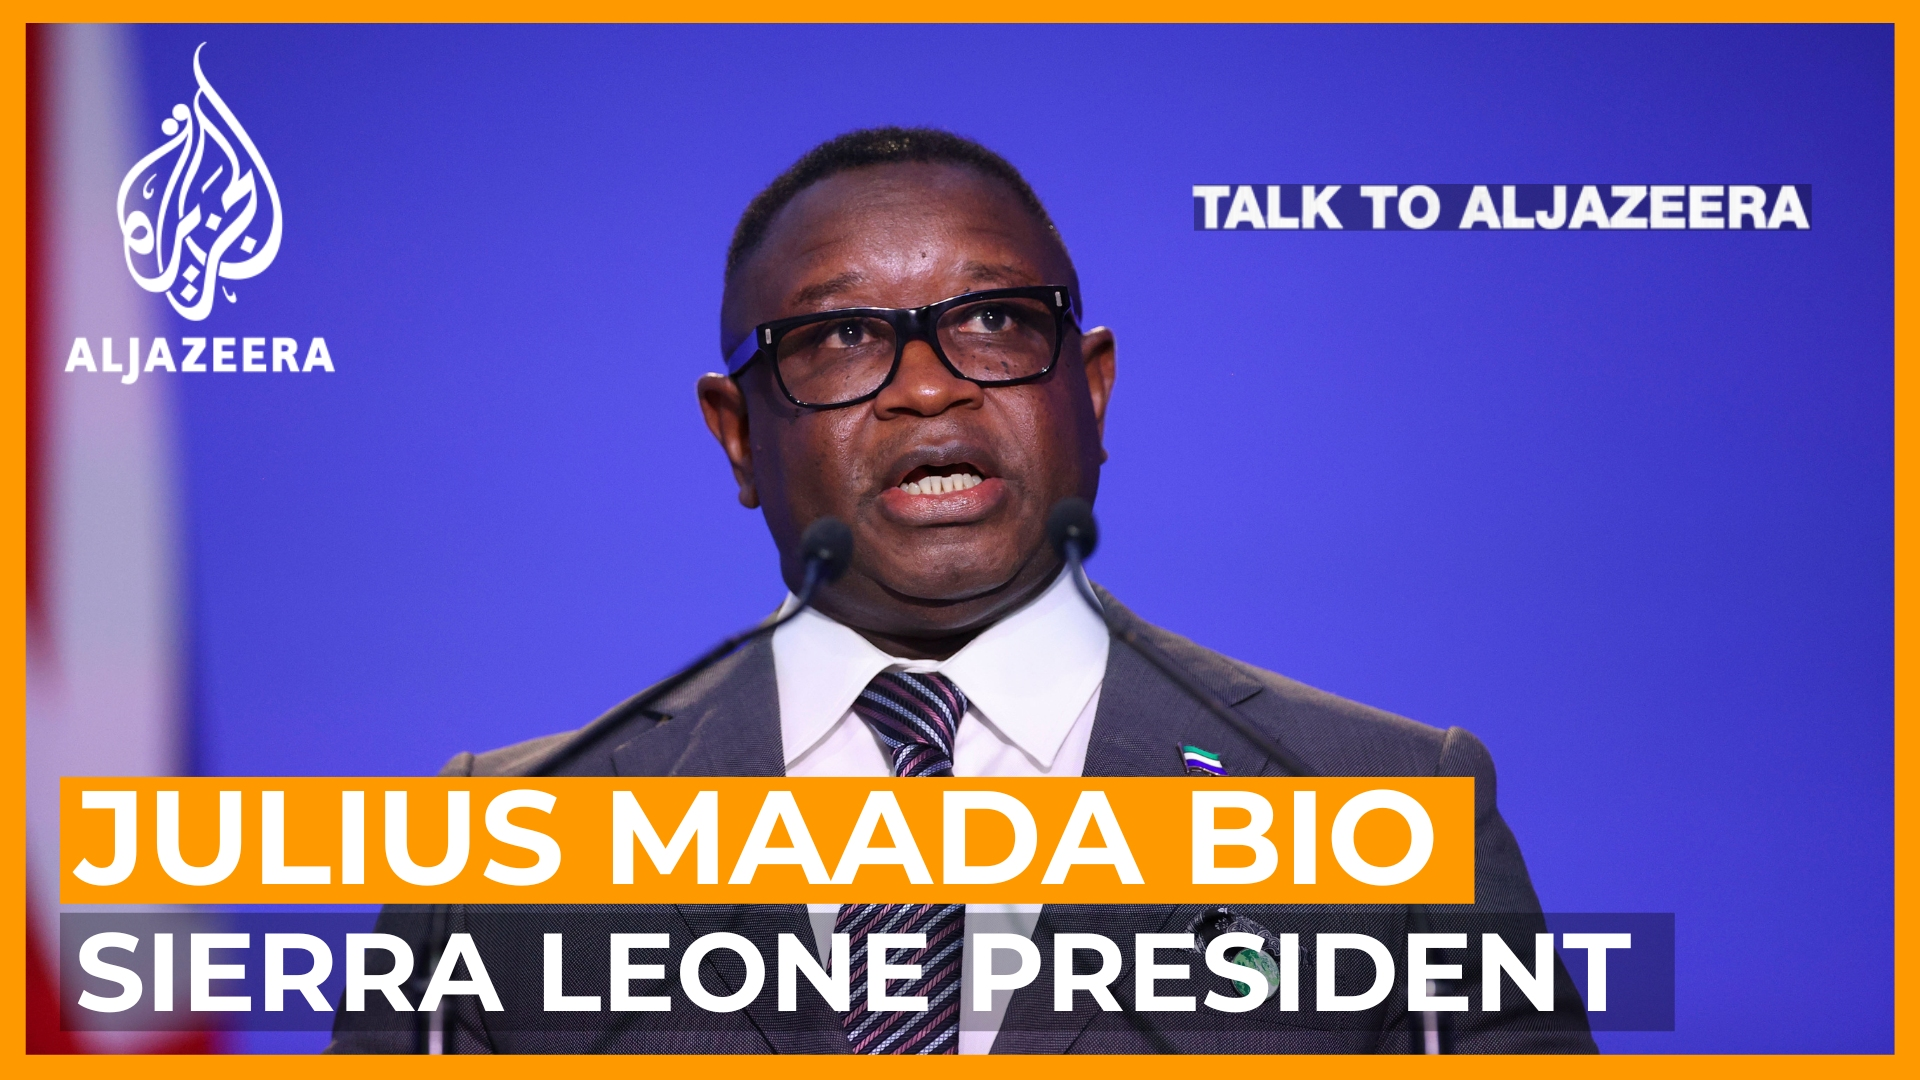 Sierra Leone's president: Are there good military coups? | Talk to Al Jazeera